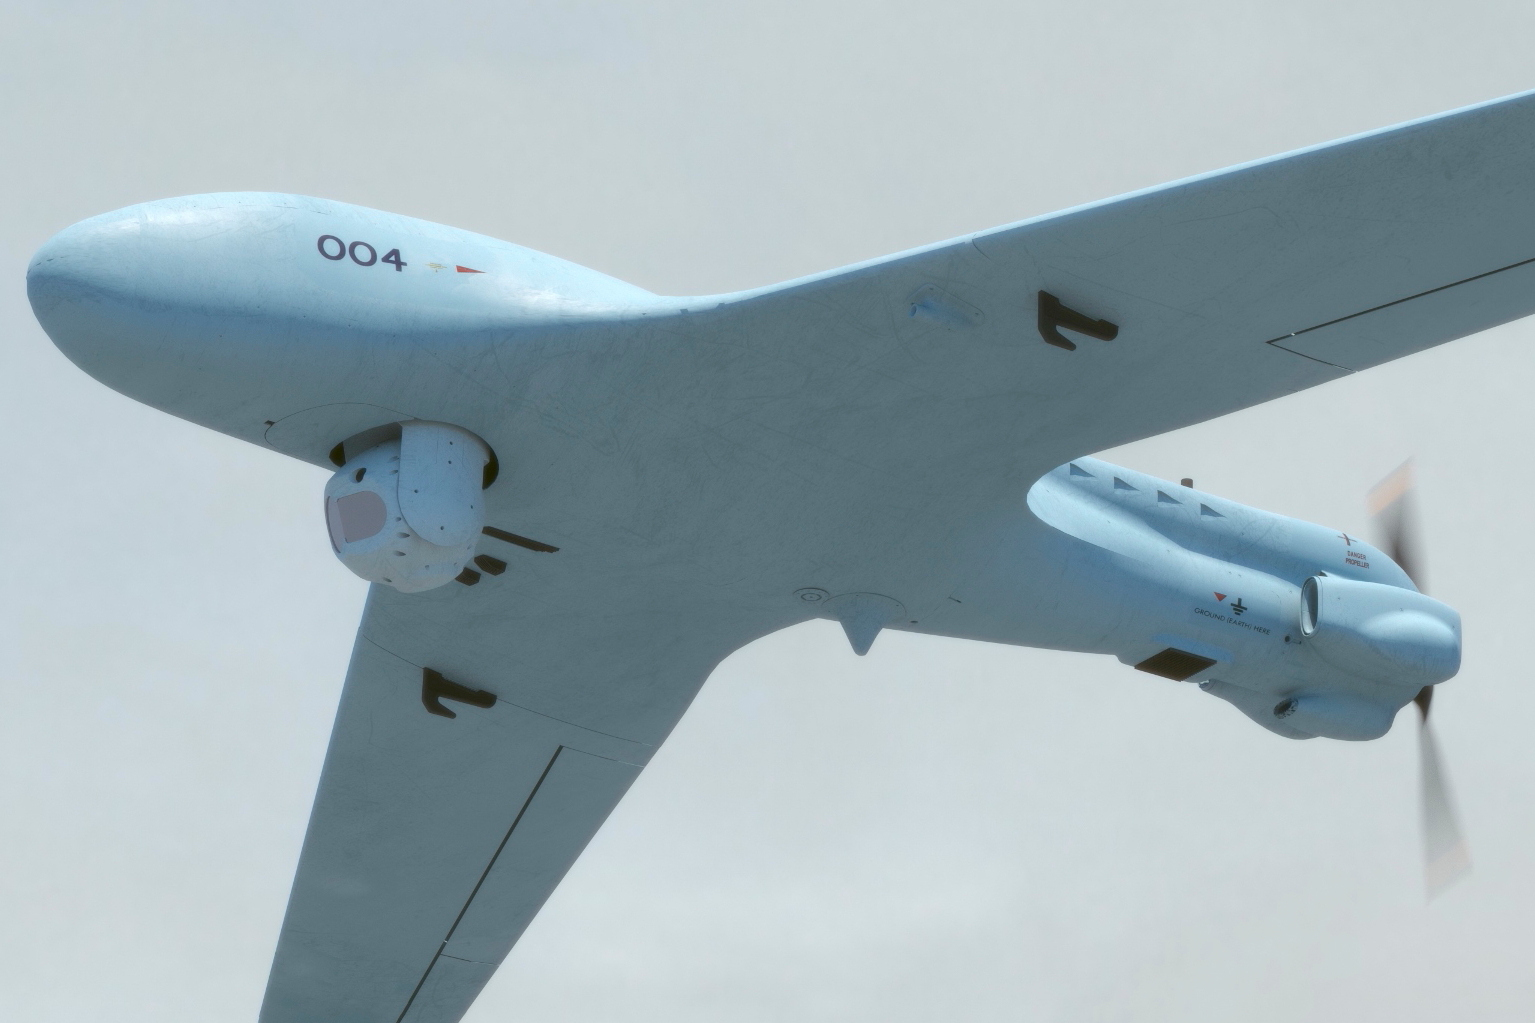 Elbit Systems’ Hermes 45 Small Tactical Unmanned Aircraft System (STUAS) will be making its first appearance at the company’s static display area (A-8) in the upcoming Paris Airshow 2019. Click to enlarge.